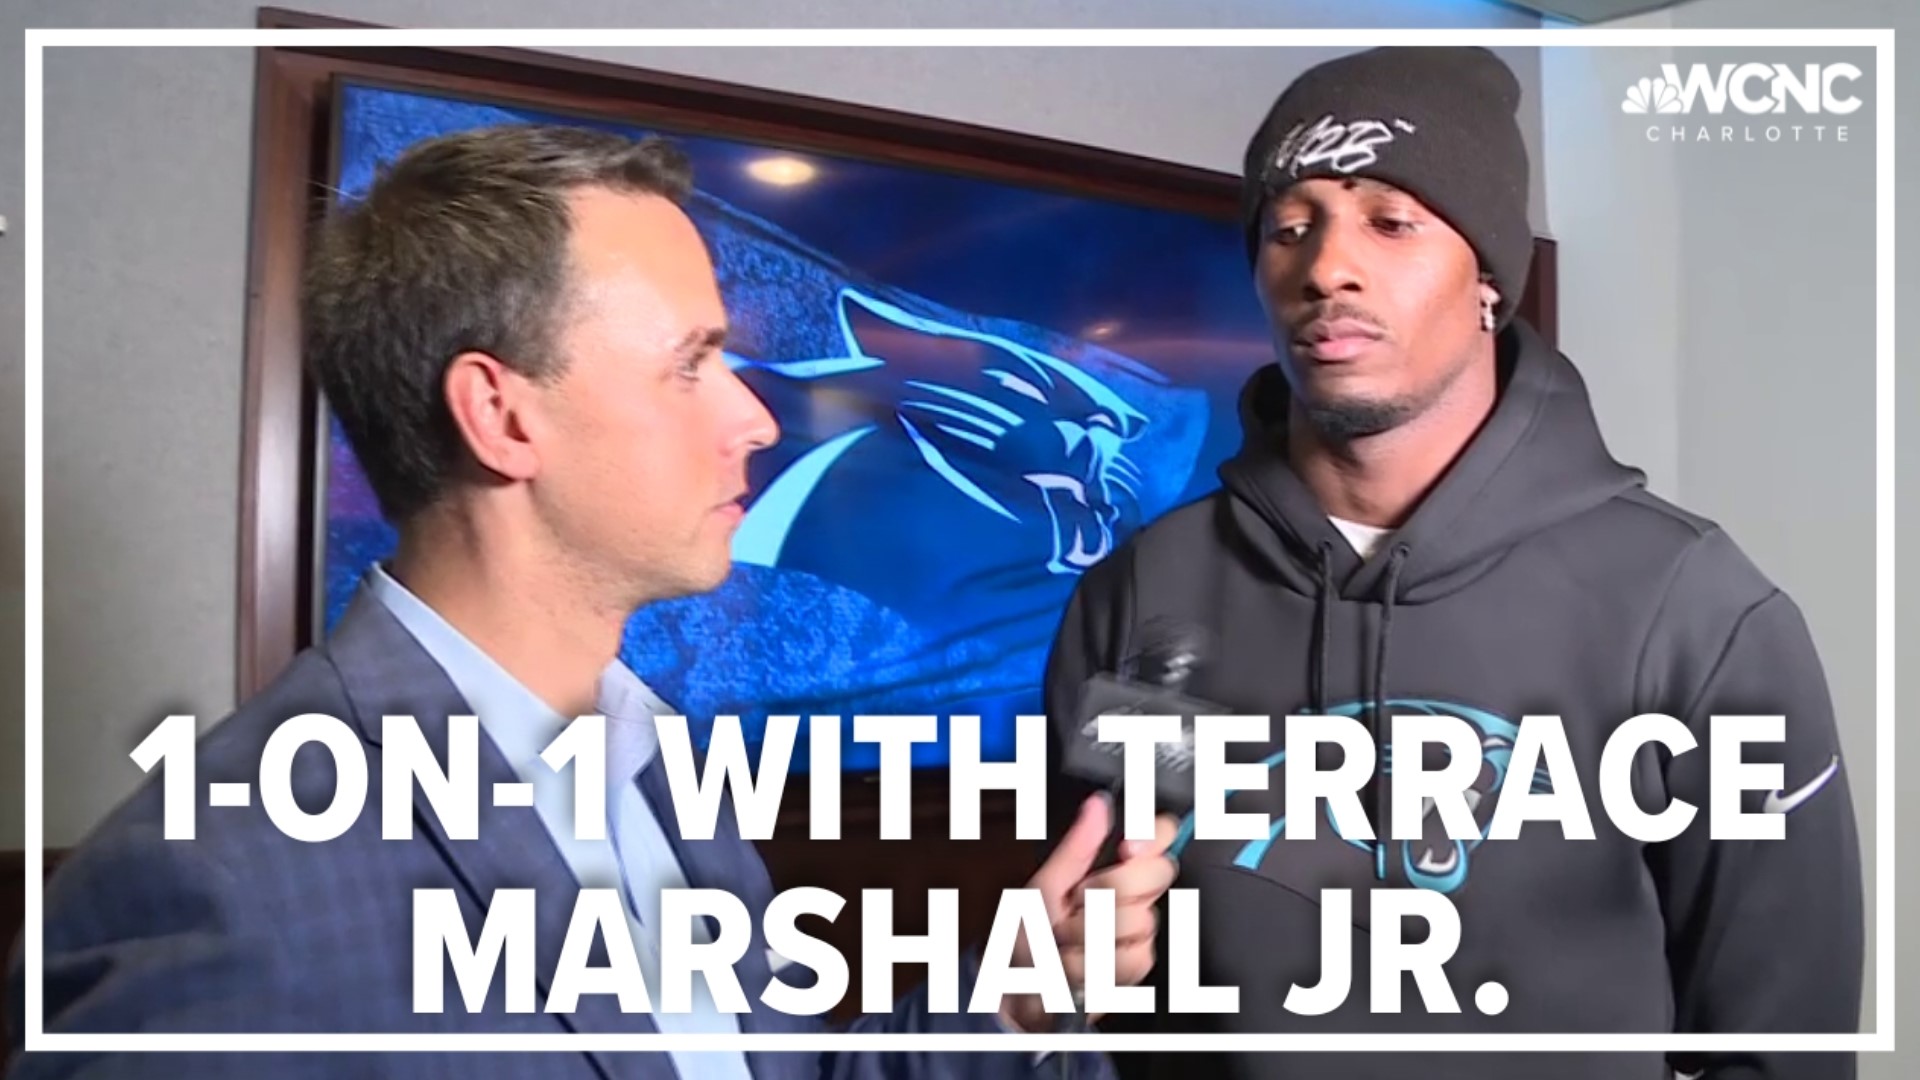 WCNC Charlotte sports director Nick Carboni caught up with Carolina Panthers wide receiver Terrace Marshall Jr. to talk about the season.